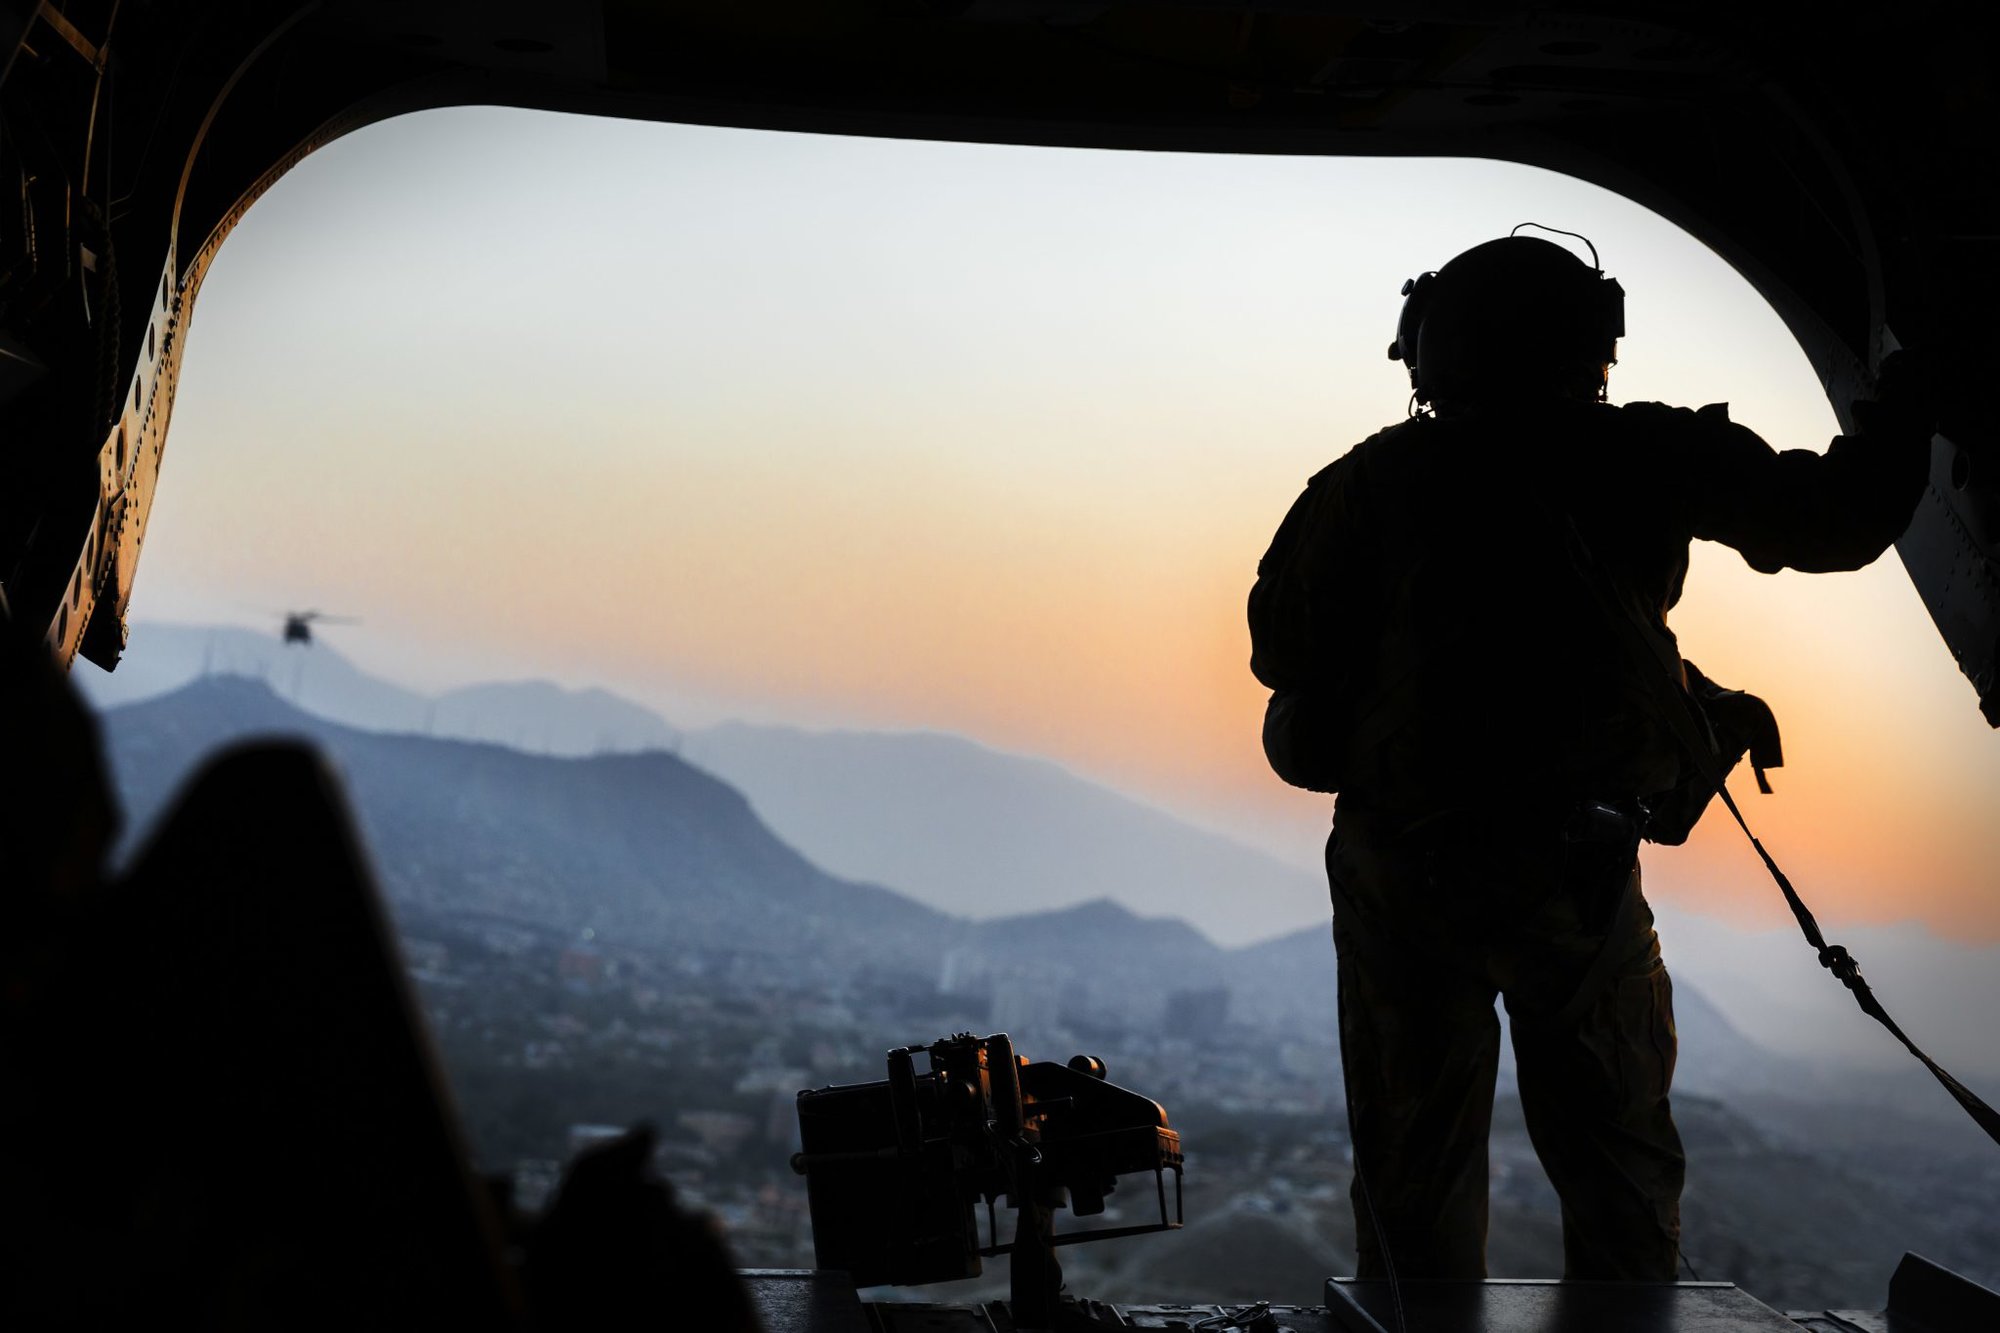 A United States Army loadmaster stands on the rear ramp of a CH-47F Chinook and watches the sunset as it flies over Kabul, Afghanistan. *** Local Caption *** Chief of Joint Operations, Vice Admiral David Johnston, and Warrant Officer Joint Operations Command, Warrant Officer Class 1 Craig Egan, visited Australian Defence Force personnel deployed on Operation HIGHROAD in Kabul, Afghanistan from 8 to 10 September 2017.
ADF personnel deployed on Operation HIGHROAD are working as part of the international community to provide long-term support to the Government of Afghanistan.
About 270 ADF personnel are deployed in Kabul and Kandahar as part of Operation HIGHROAD, Australia’s contribution to the NATO led Resolute Support mission.